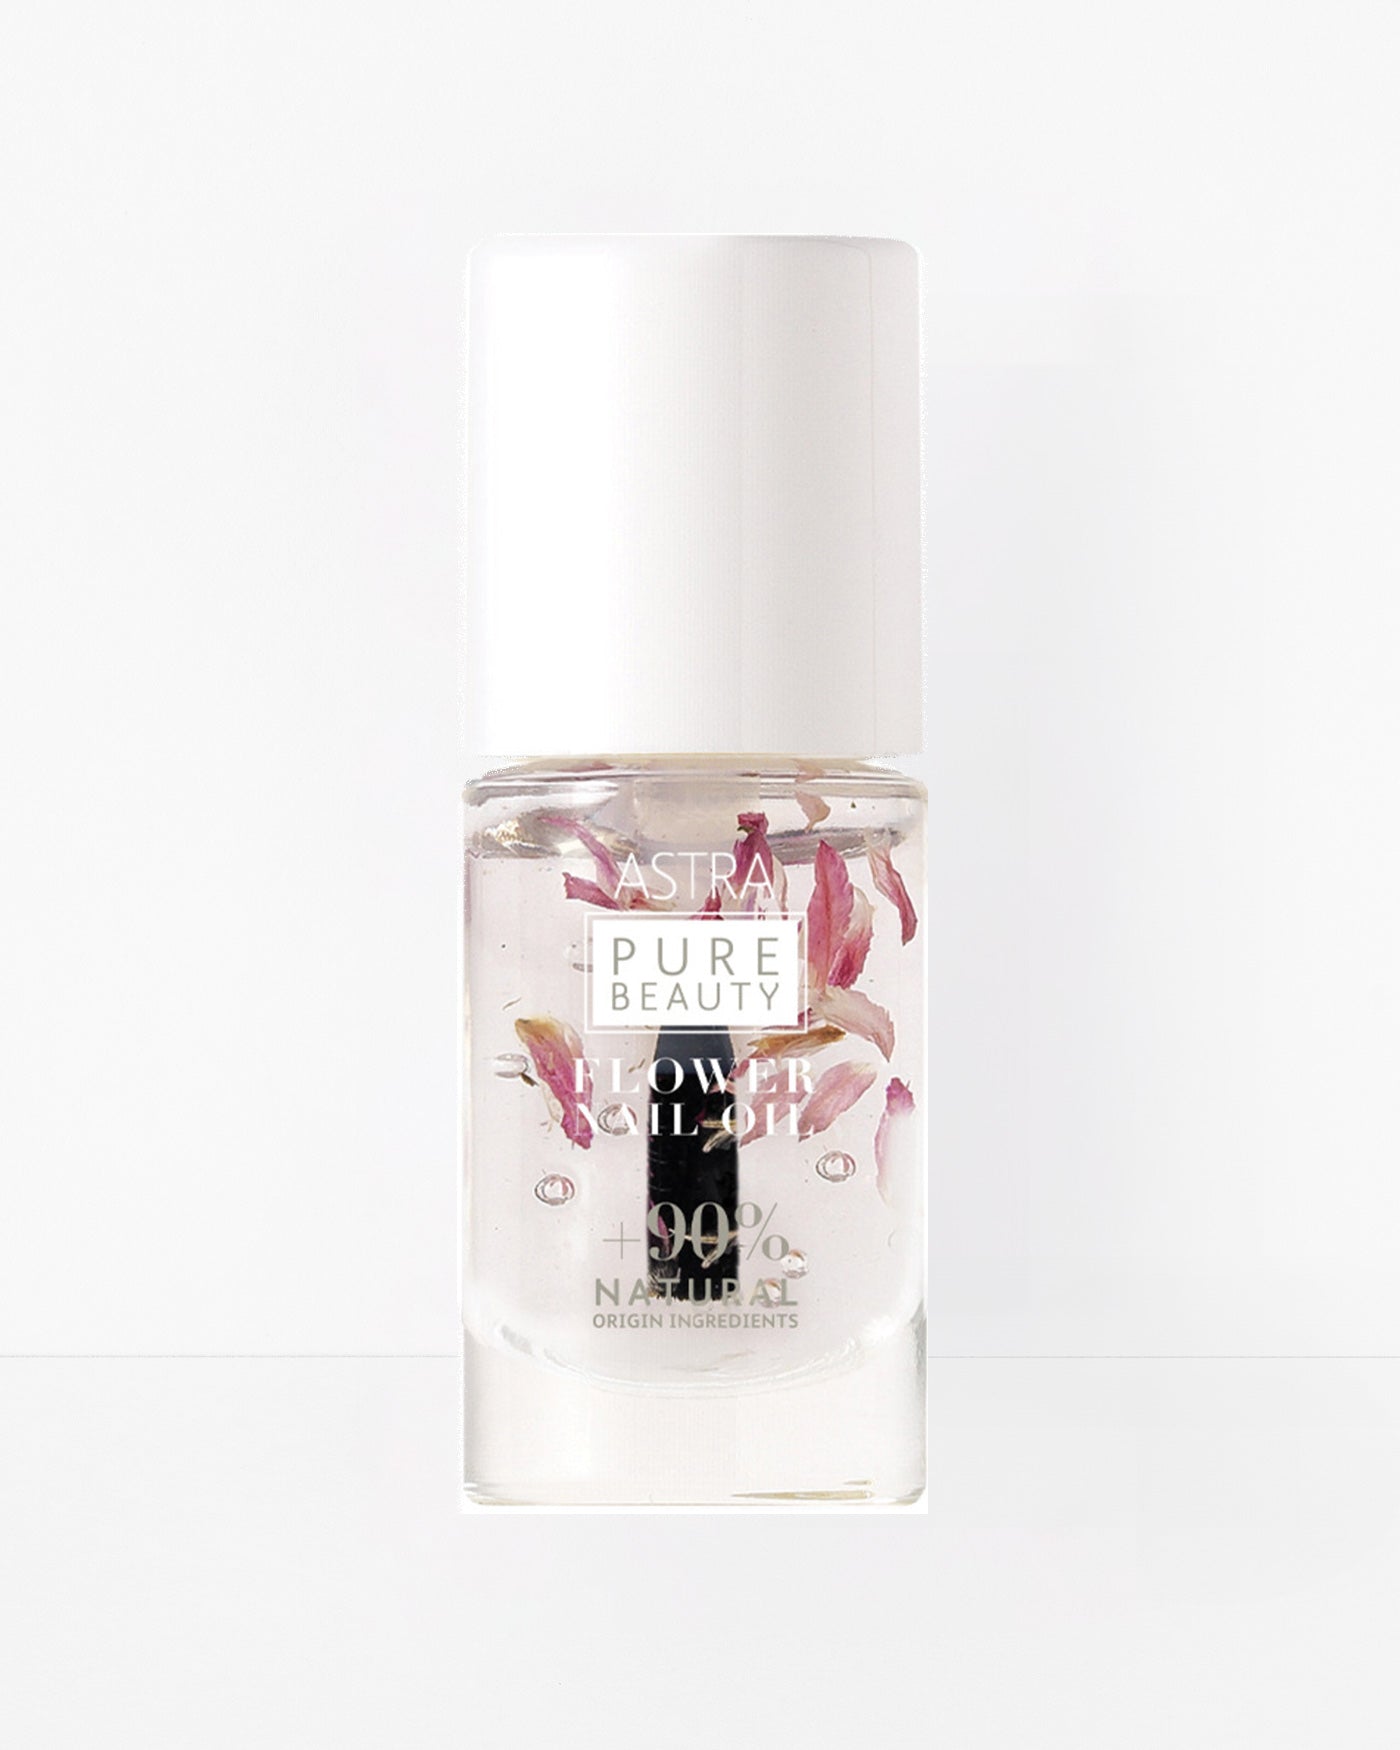 PURE BEAUTY FLOWER NAIL OIL - Olio Unghie + Cuticole - Make-Up - Astra Make-Up